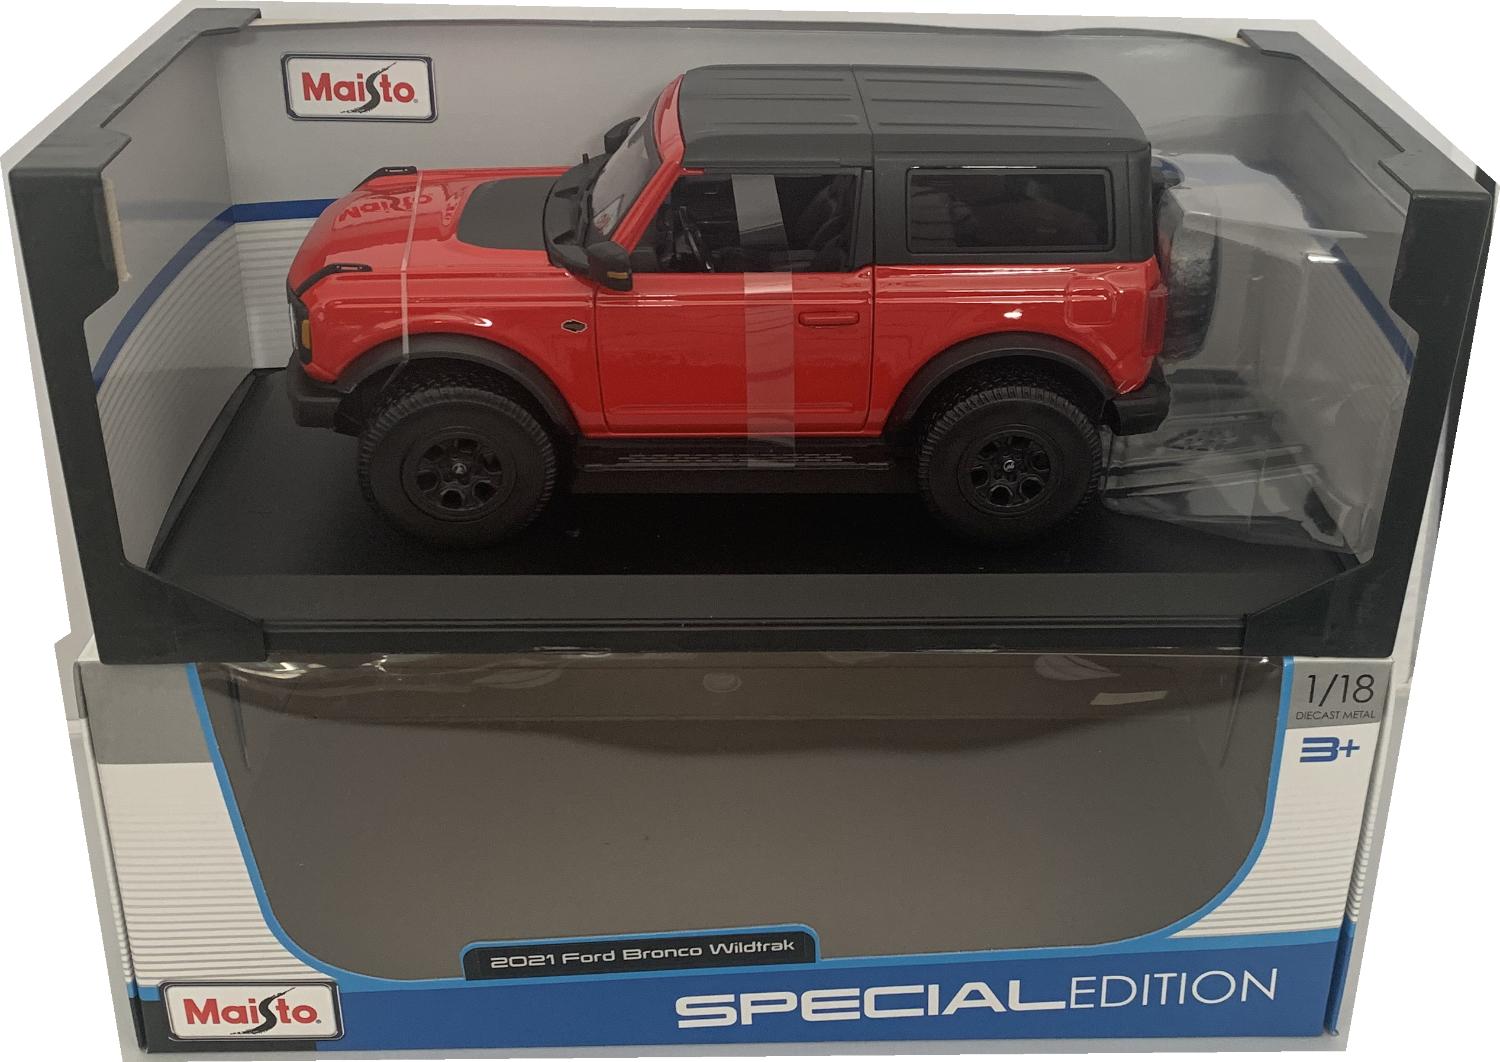 An excellent scale model of the Ford Bronco Wildtrak with high level of detail throughout, all authentically recreated.   The Model is mounted on a removable plinth and presented in a window display box.  The car is approx. 24 cm long and the presentation box is 34.5 cm long